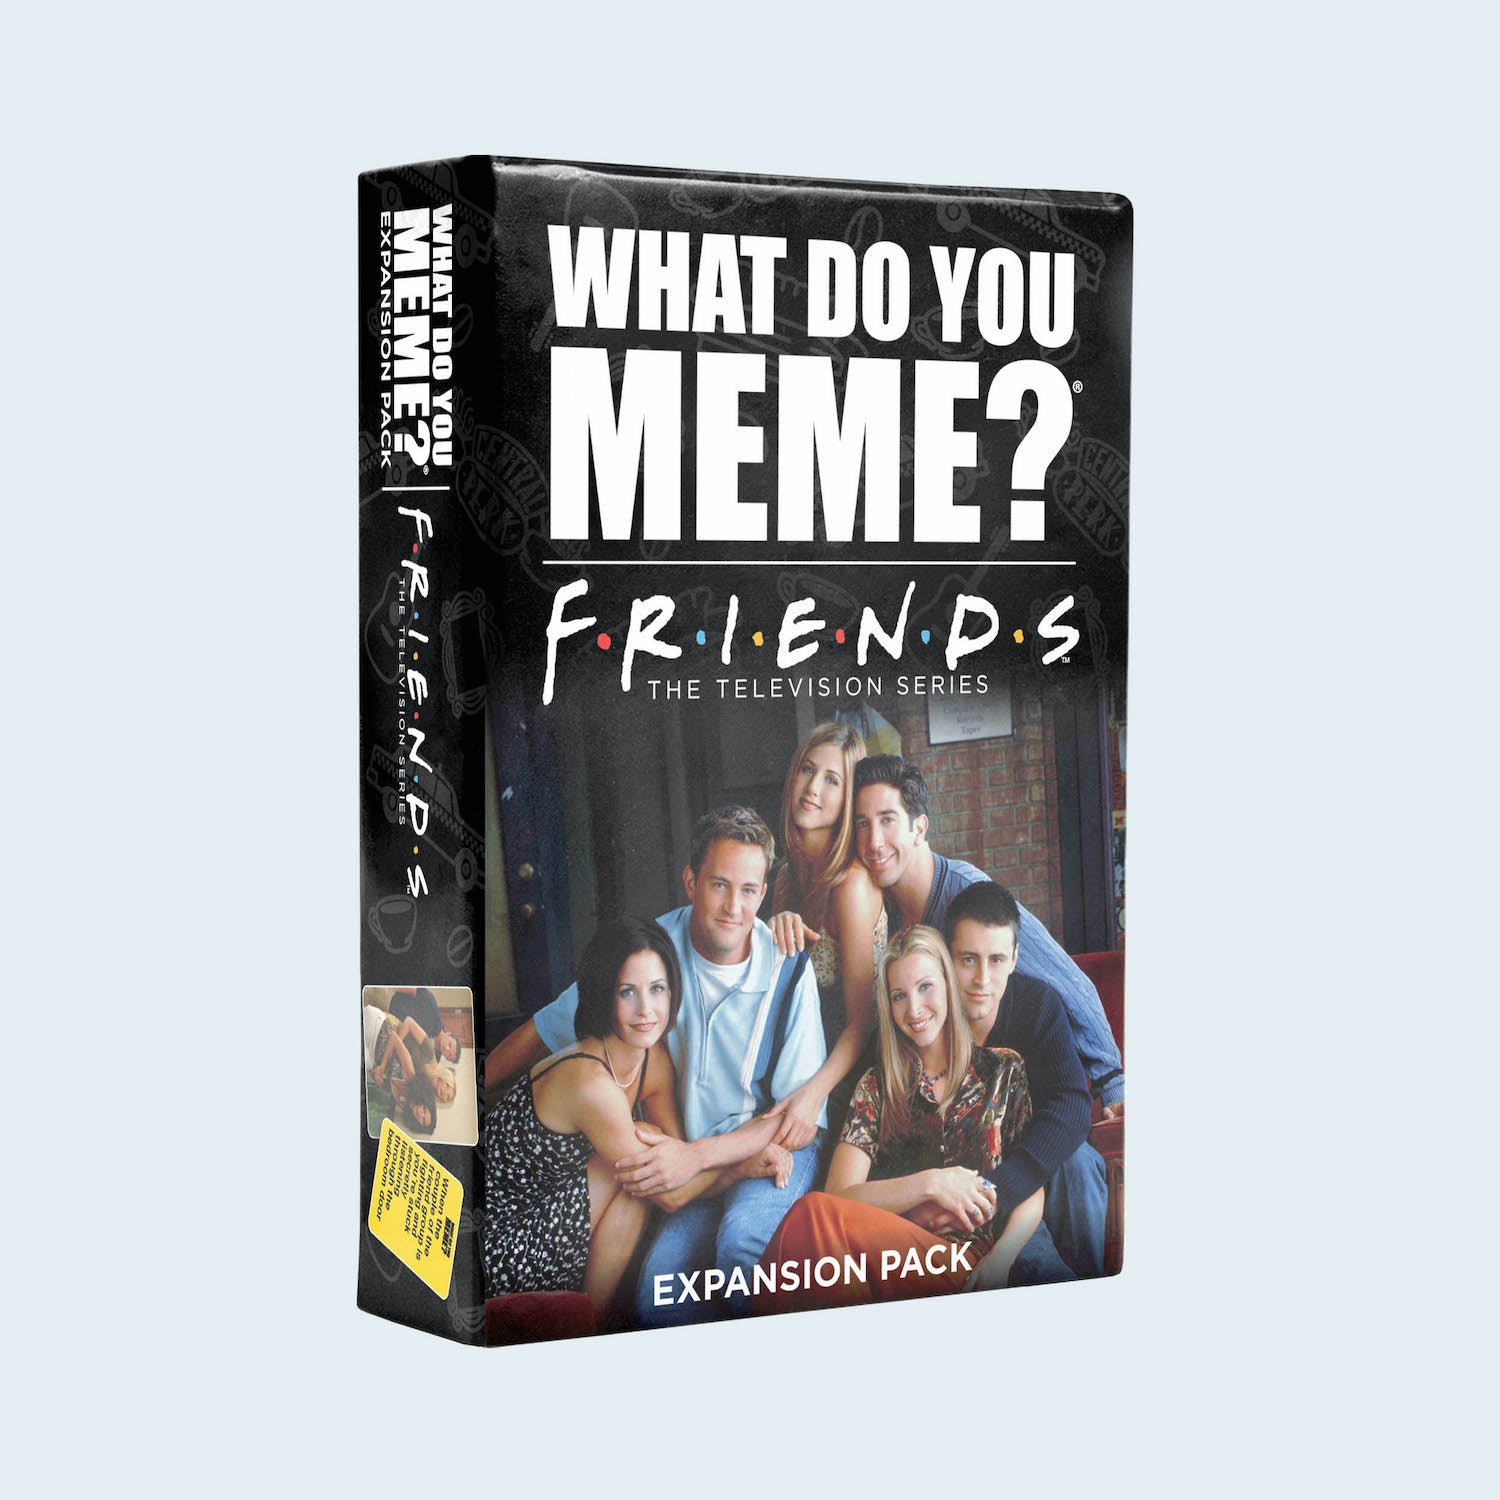 what-do-you-meme-friends-expansion-pack-game-box-and-game-play-02-what-do-you-meme-by-relatable